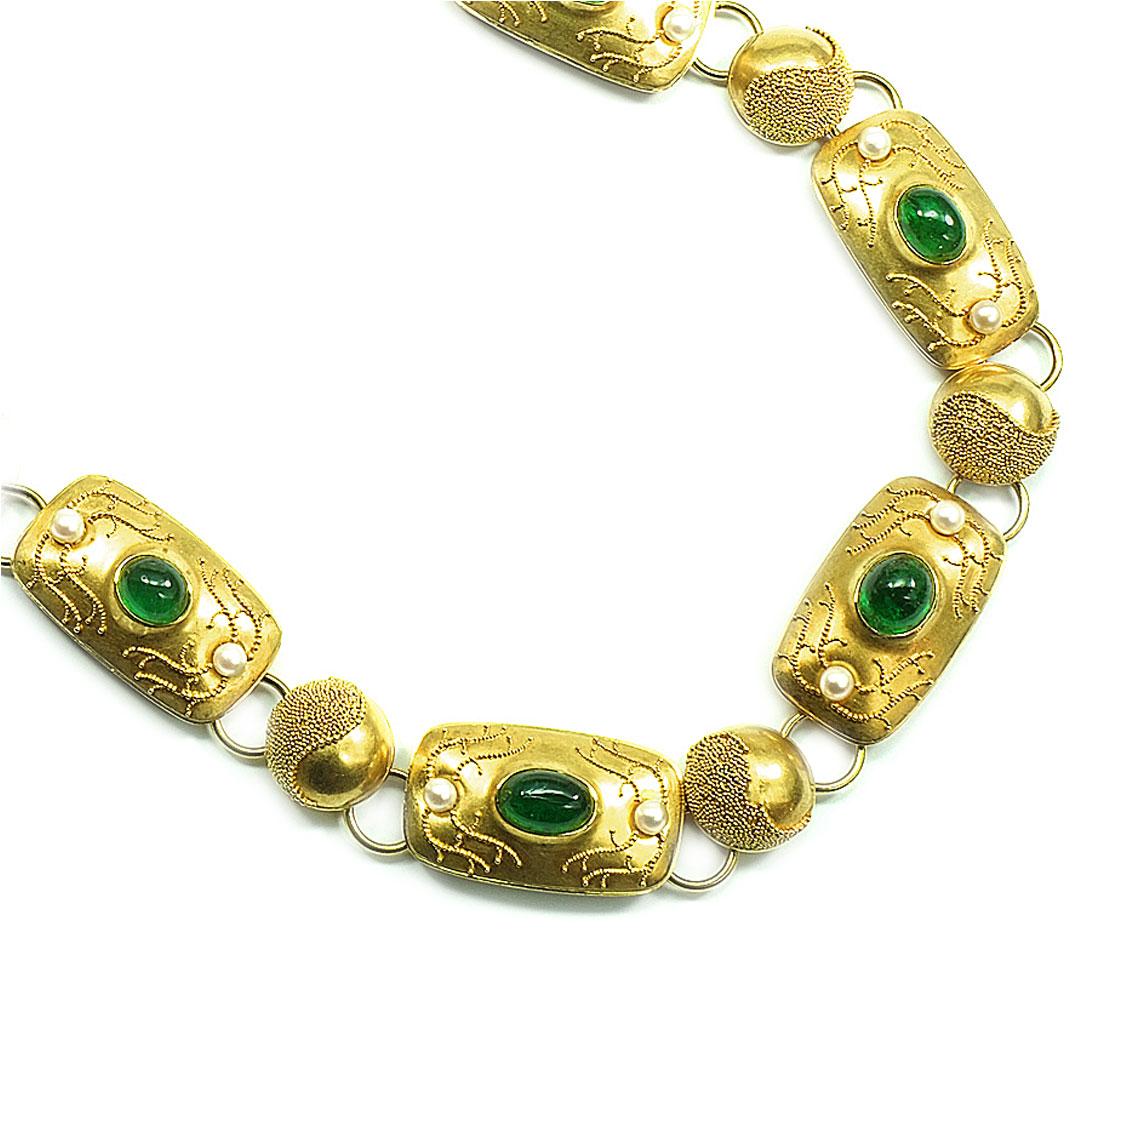 Signed 9 carat natural emerald pearl and 18K gold granulation choker necklace, circa 1930

This decorative choker necklace is designed as round and rectangular links, featuring 10 natural emerald cabochons, richly decorated with fine gold